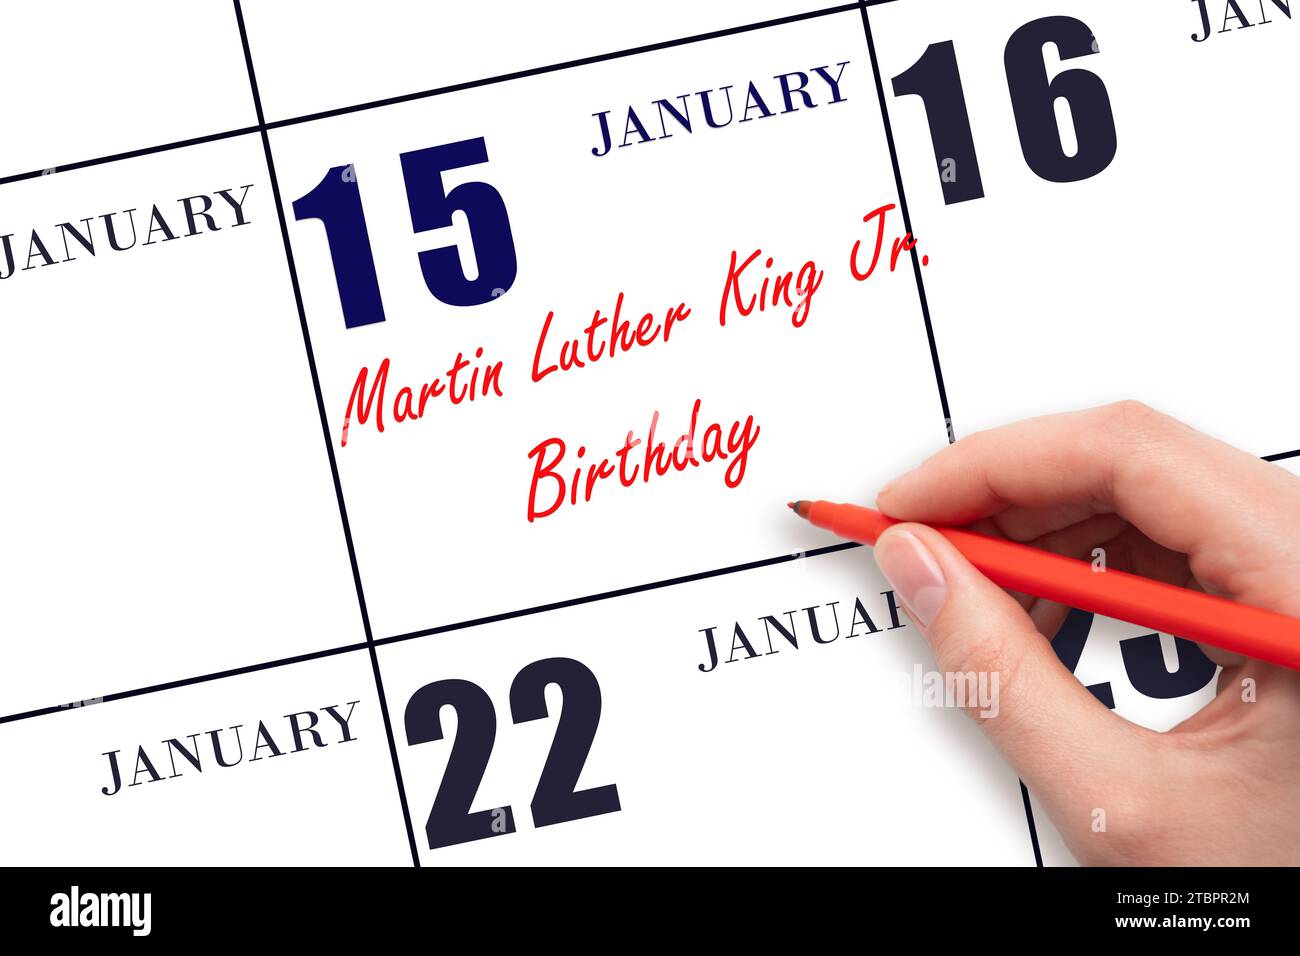 January 15. Hand writing text Martin Luther King Jr. Birthday on calendar date. Save the date. Holiday.  Day of the year concept. Stock Photo